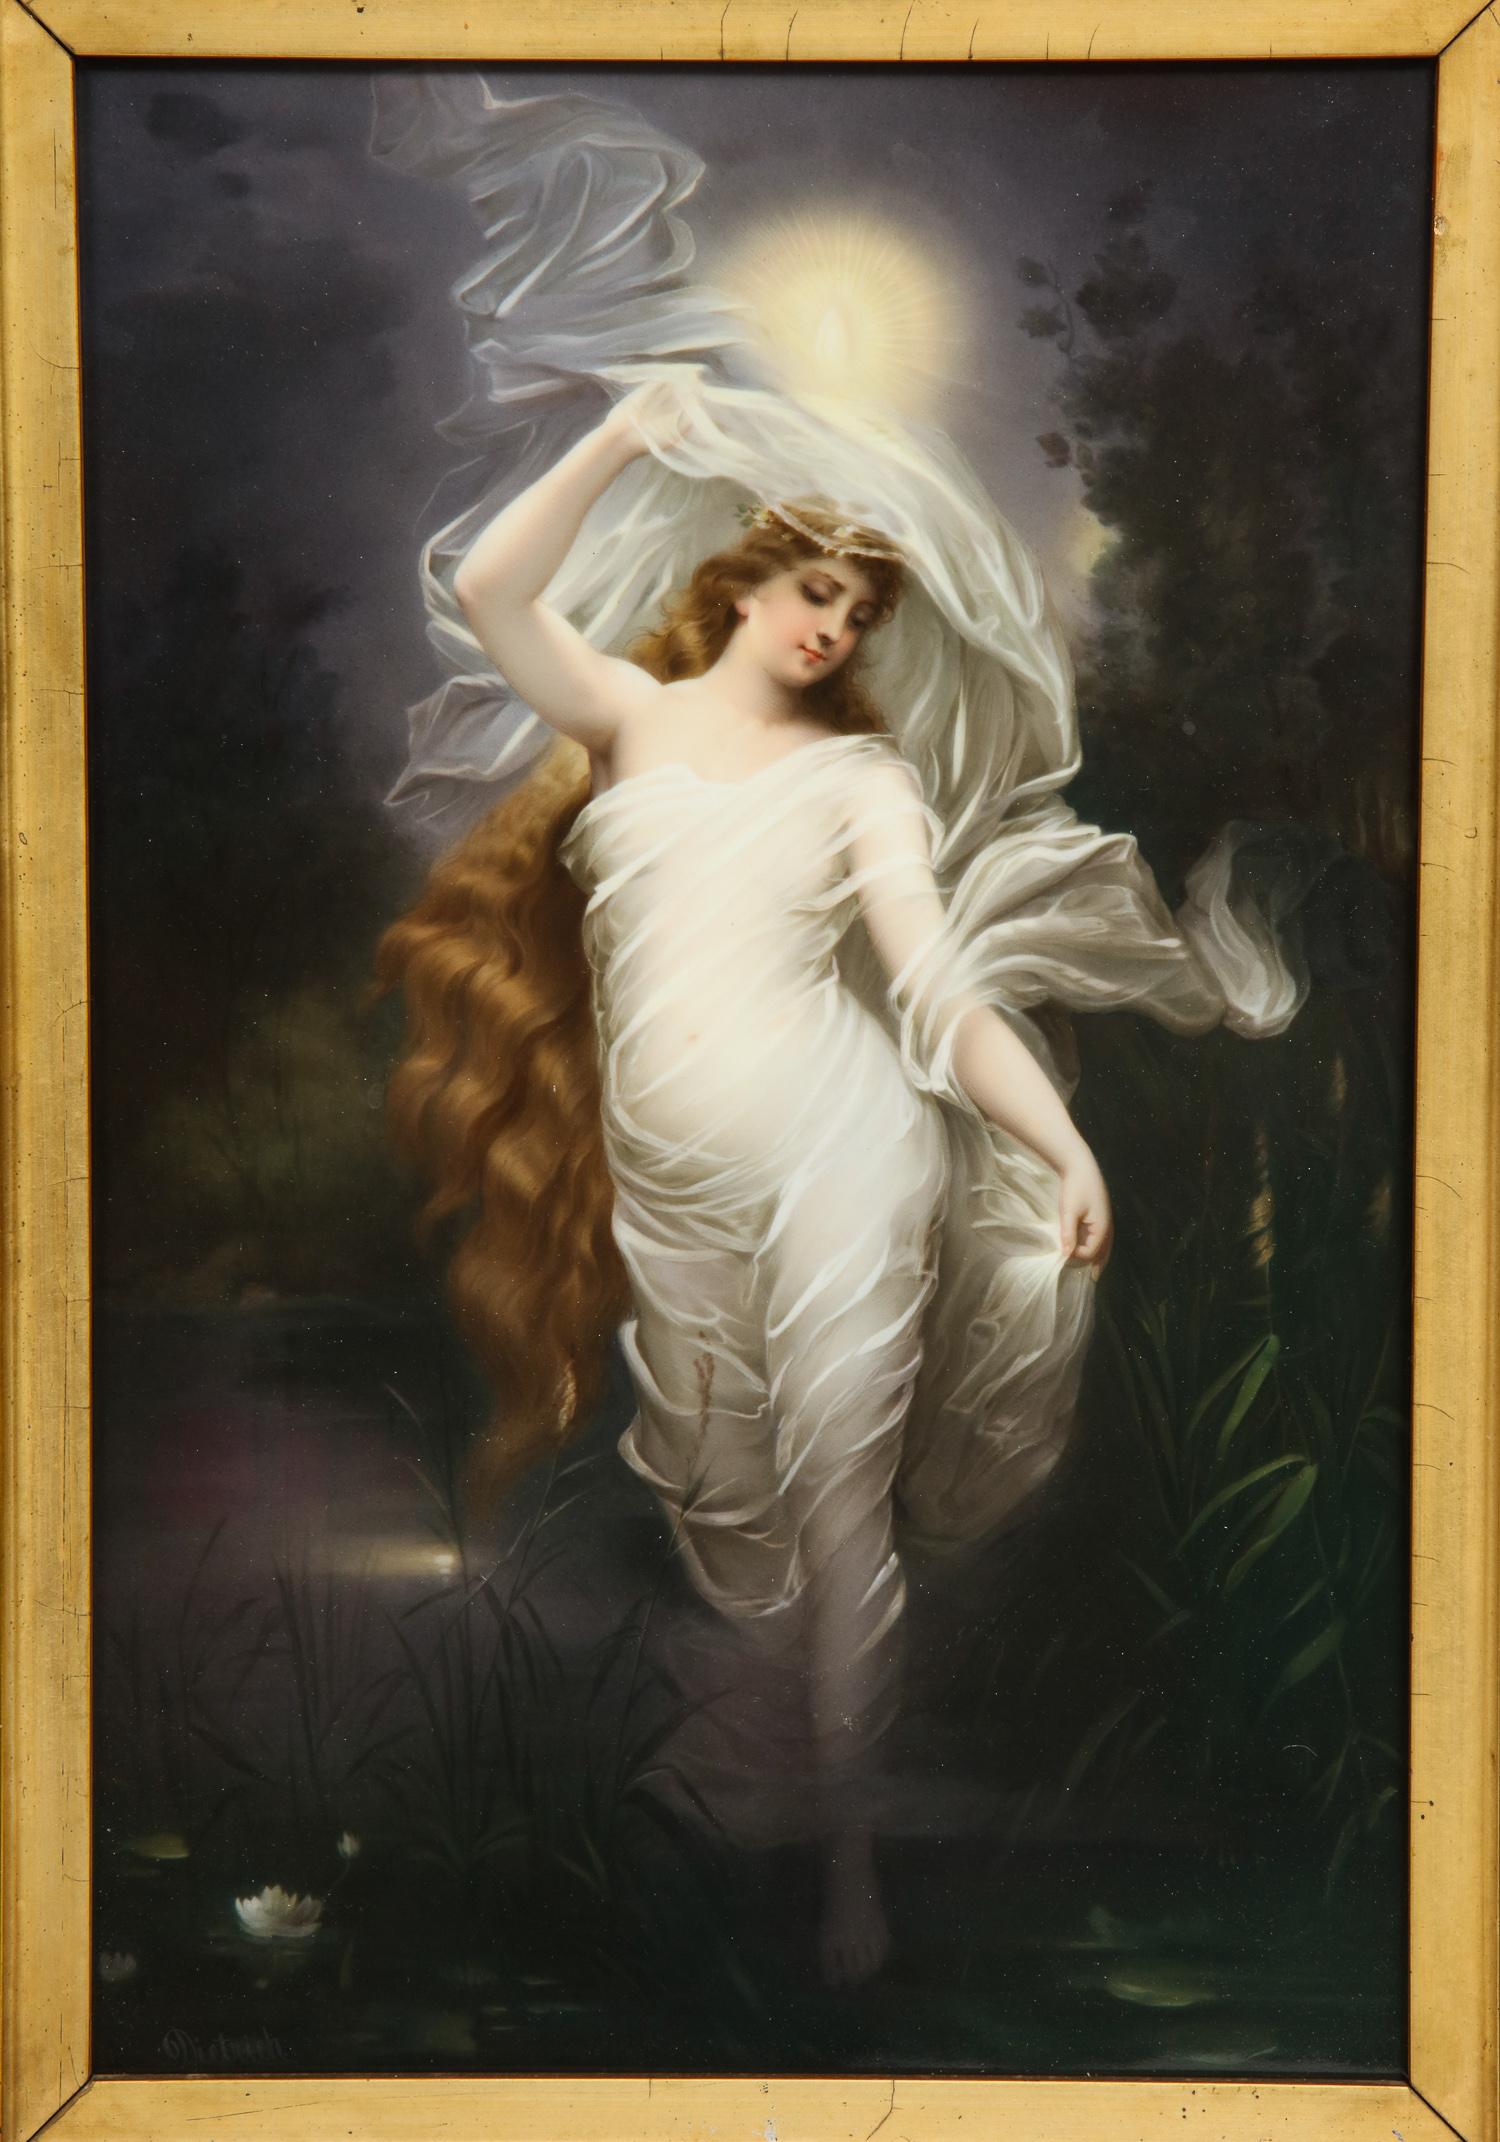 A large and exceptional quality hand-painted Berlin K.P.M Porcelain plaque of female maiden by Dietrich, late 19th century, in original giltwood frame.

Exceptional quality painting. Excellent condition. No chips, damages or repairs.

Marked